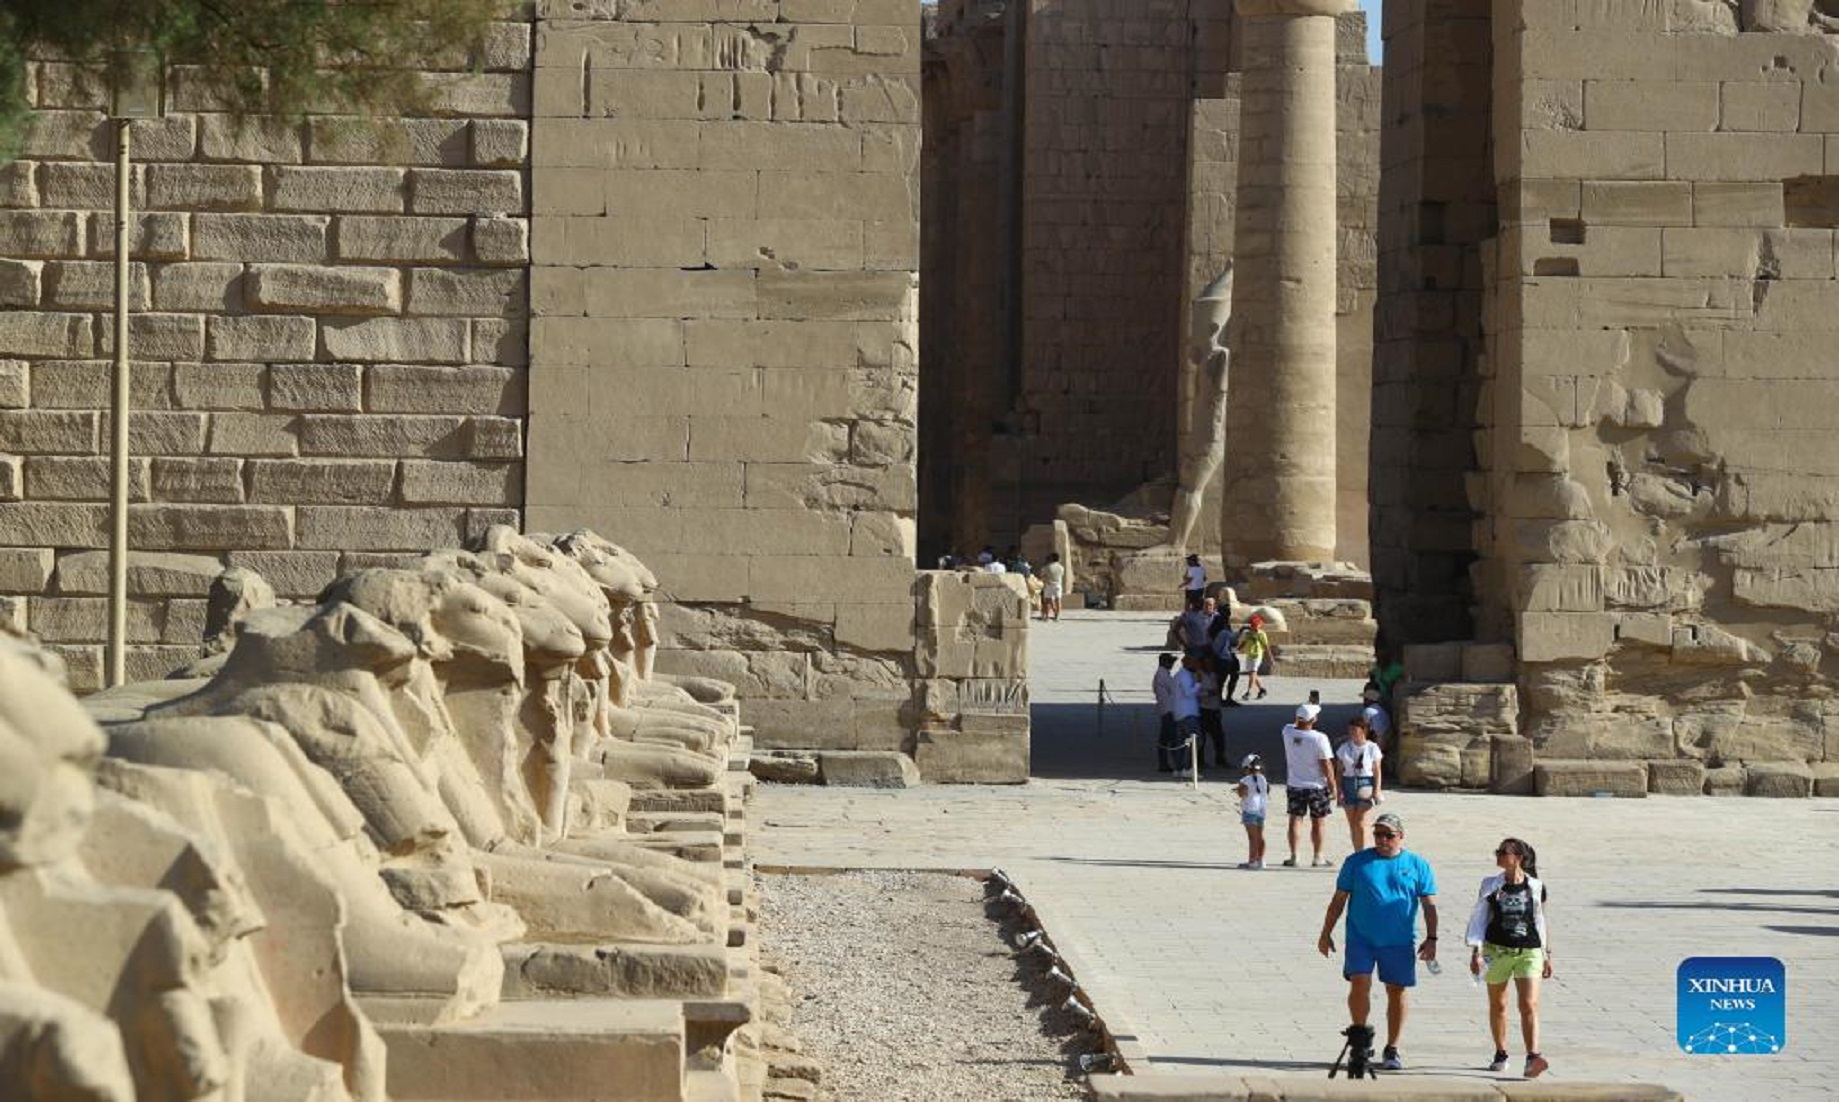 Feature: With Reopening Of Ancient Avenue, Egypt’s Luxor Witnesses Revived Tourism Amid COVID-19